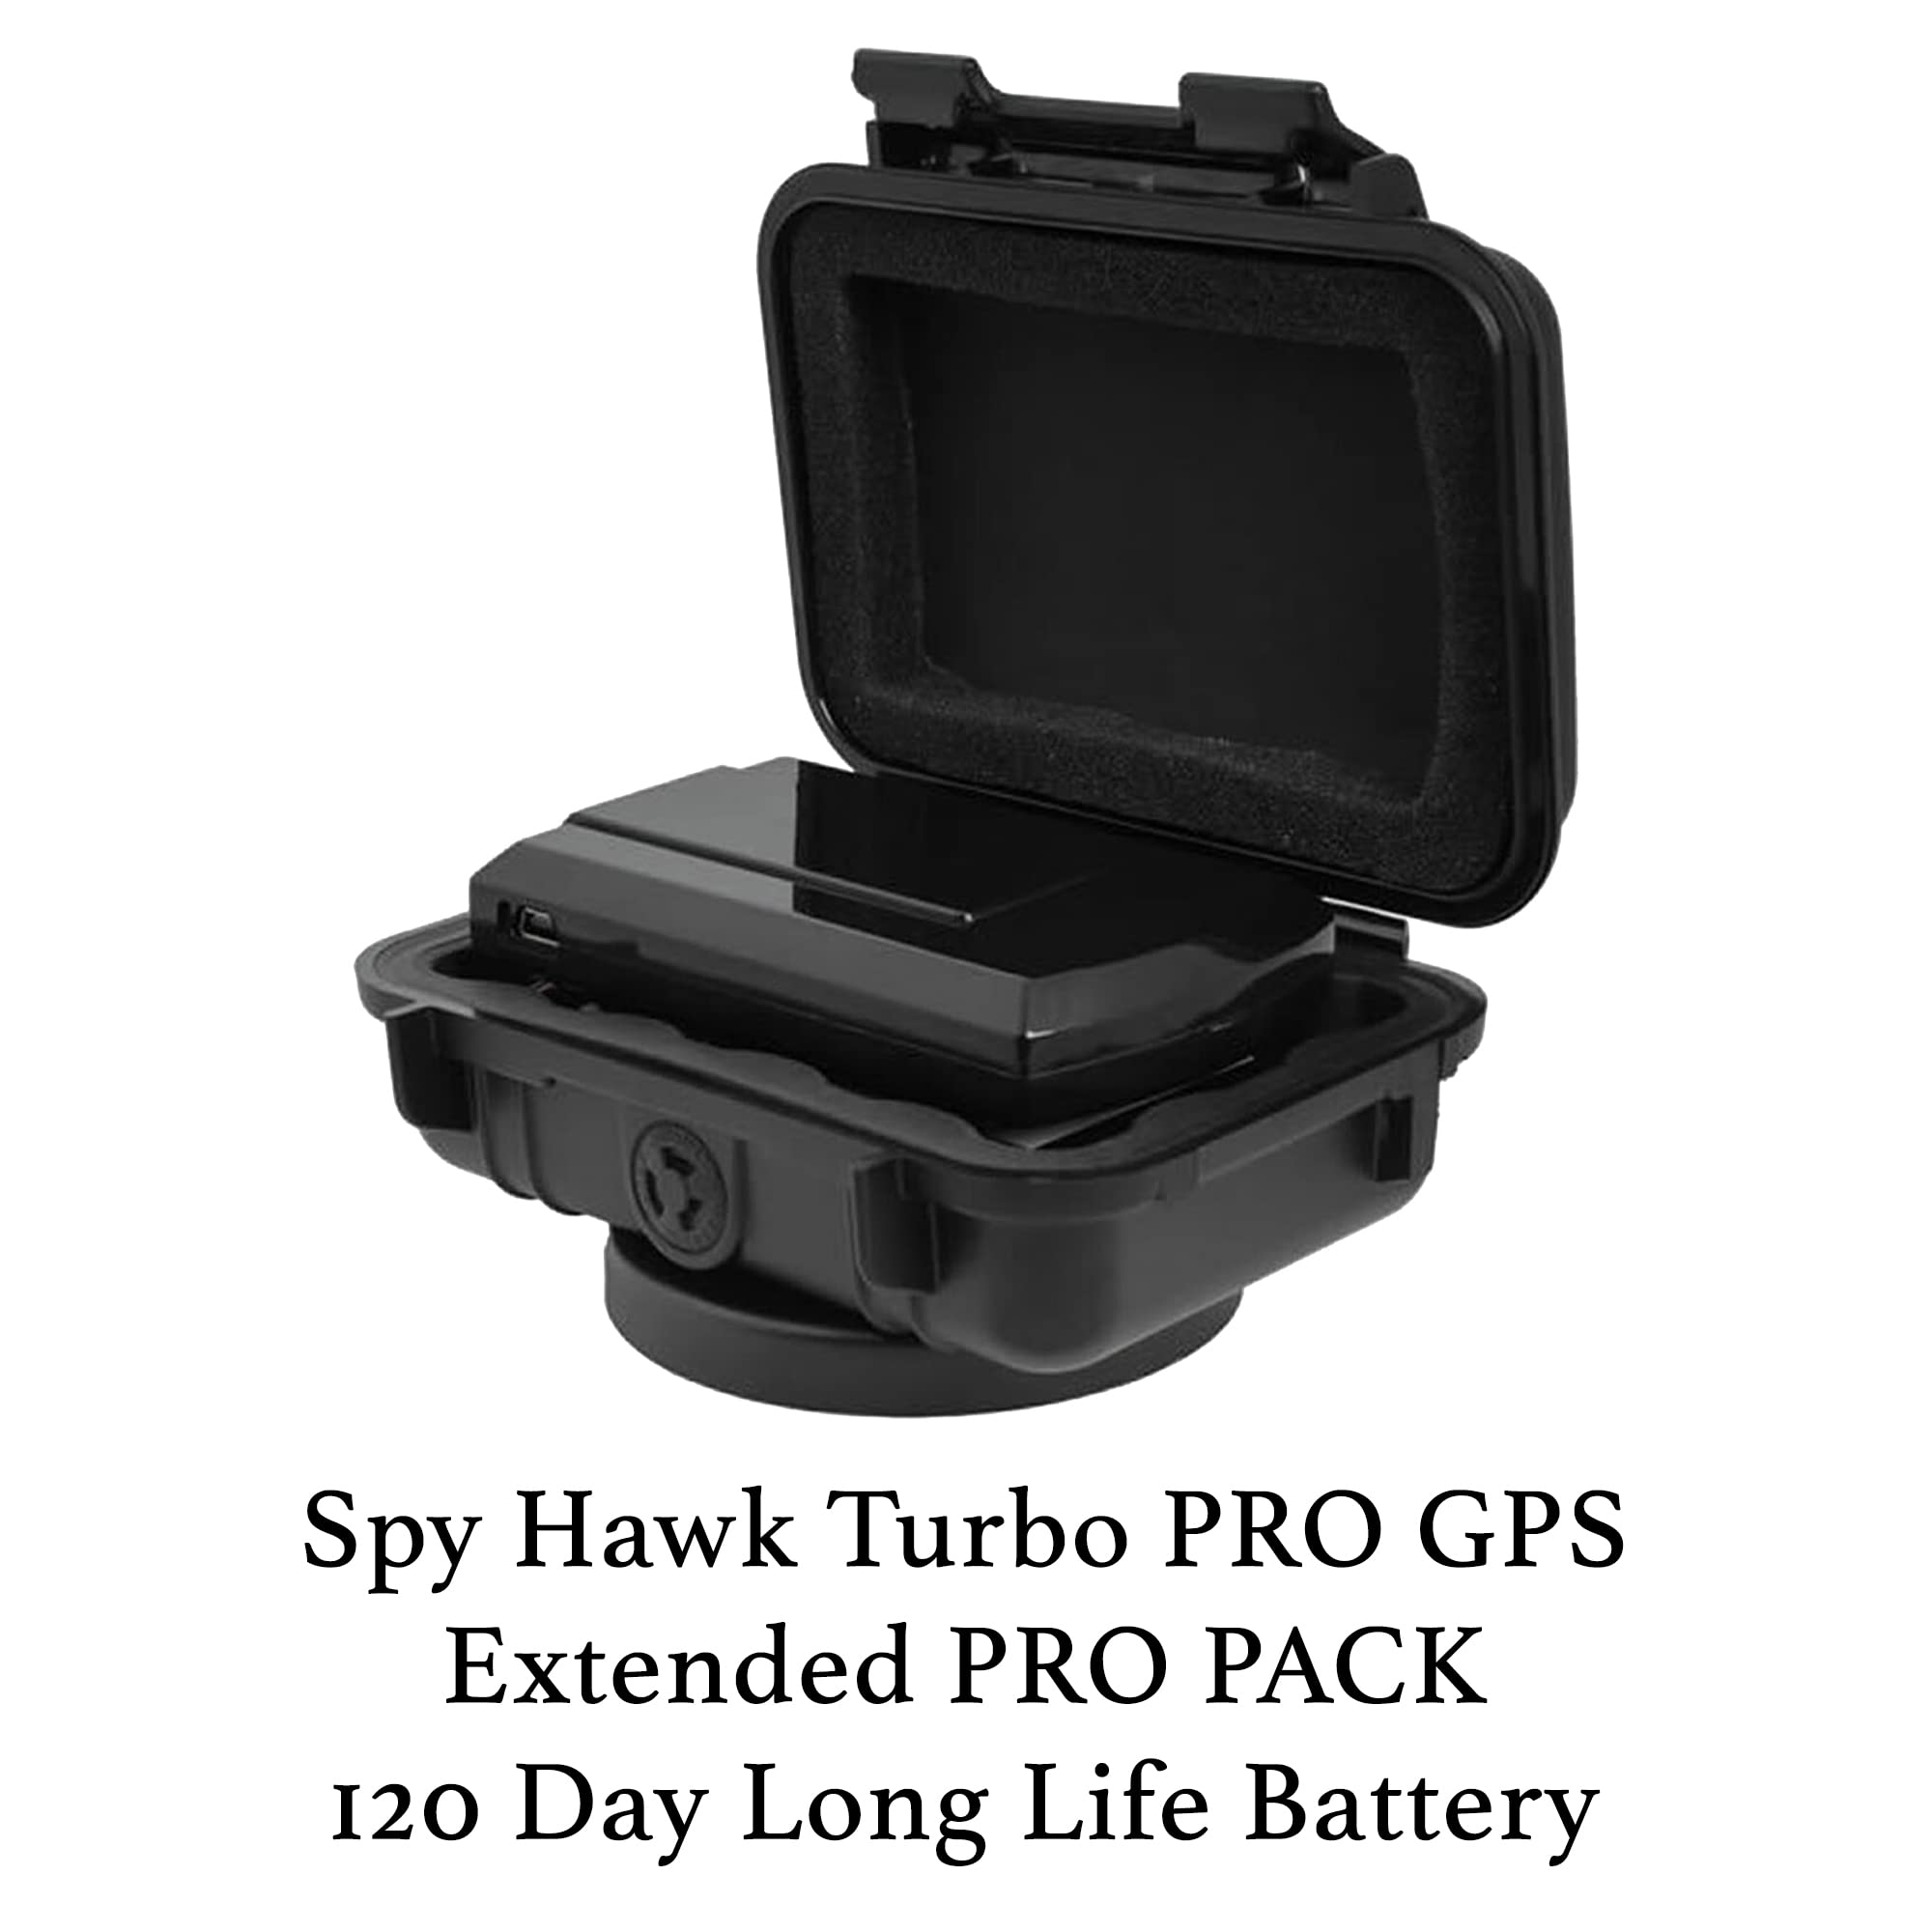 Real Time 3G GPS Tracker - Portable Homing Device - Worldwide Location Tracking - 8 Inch Accuracy - Magnetic Case - Best Mini Locator for Cars, People, Fleet, Trucks or Luggage - Free Security Ebook